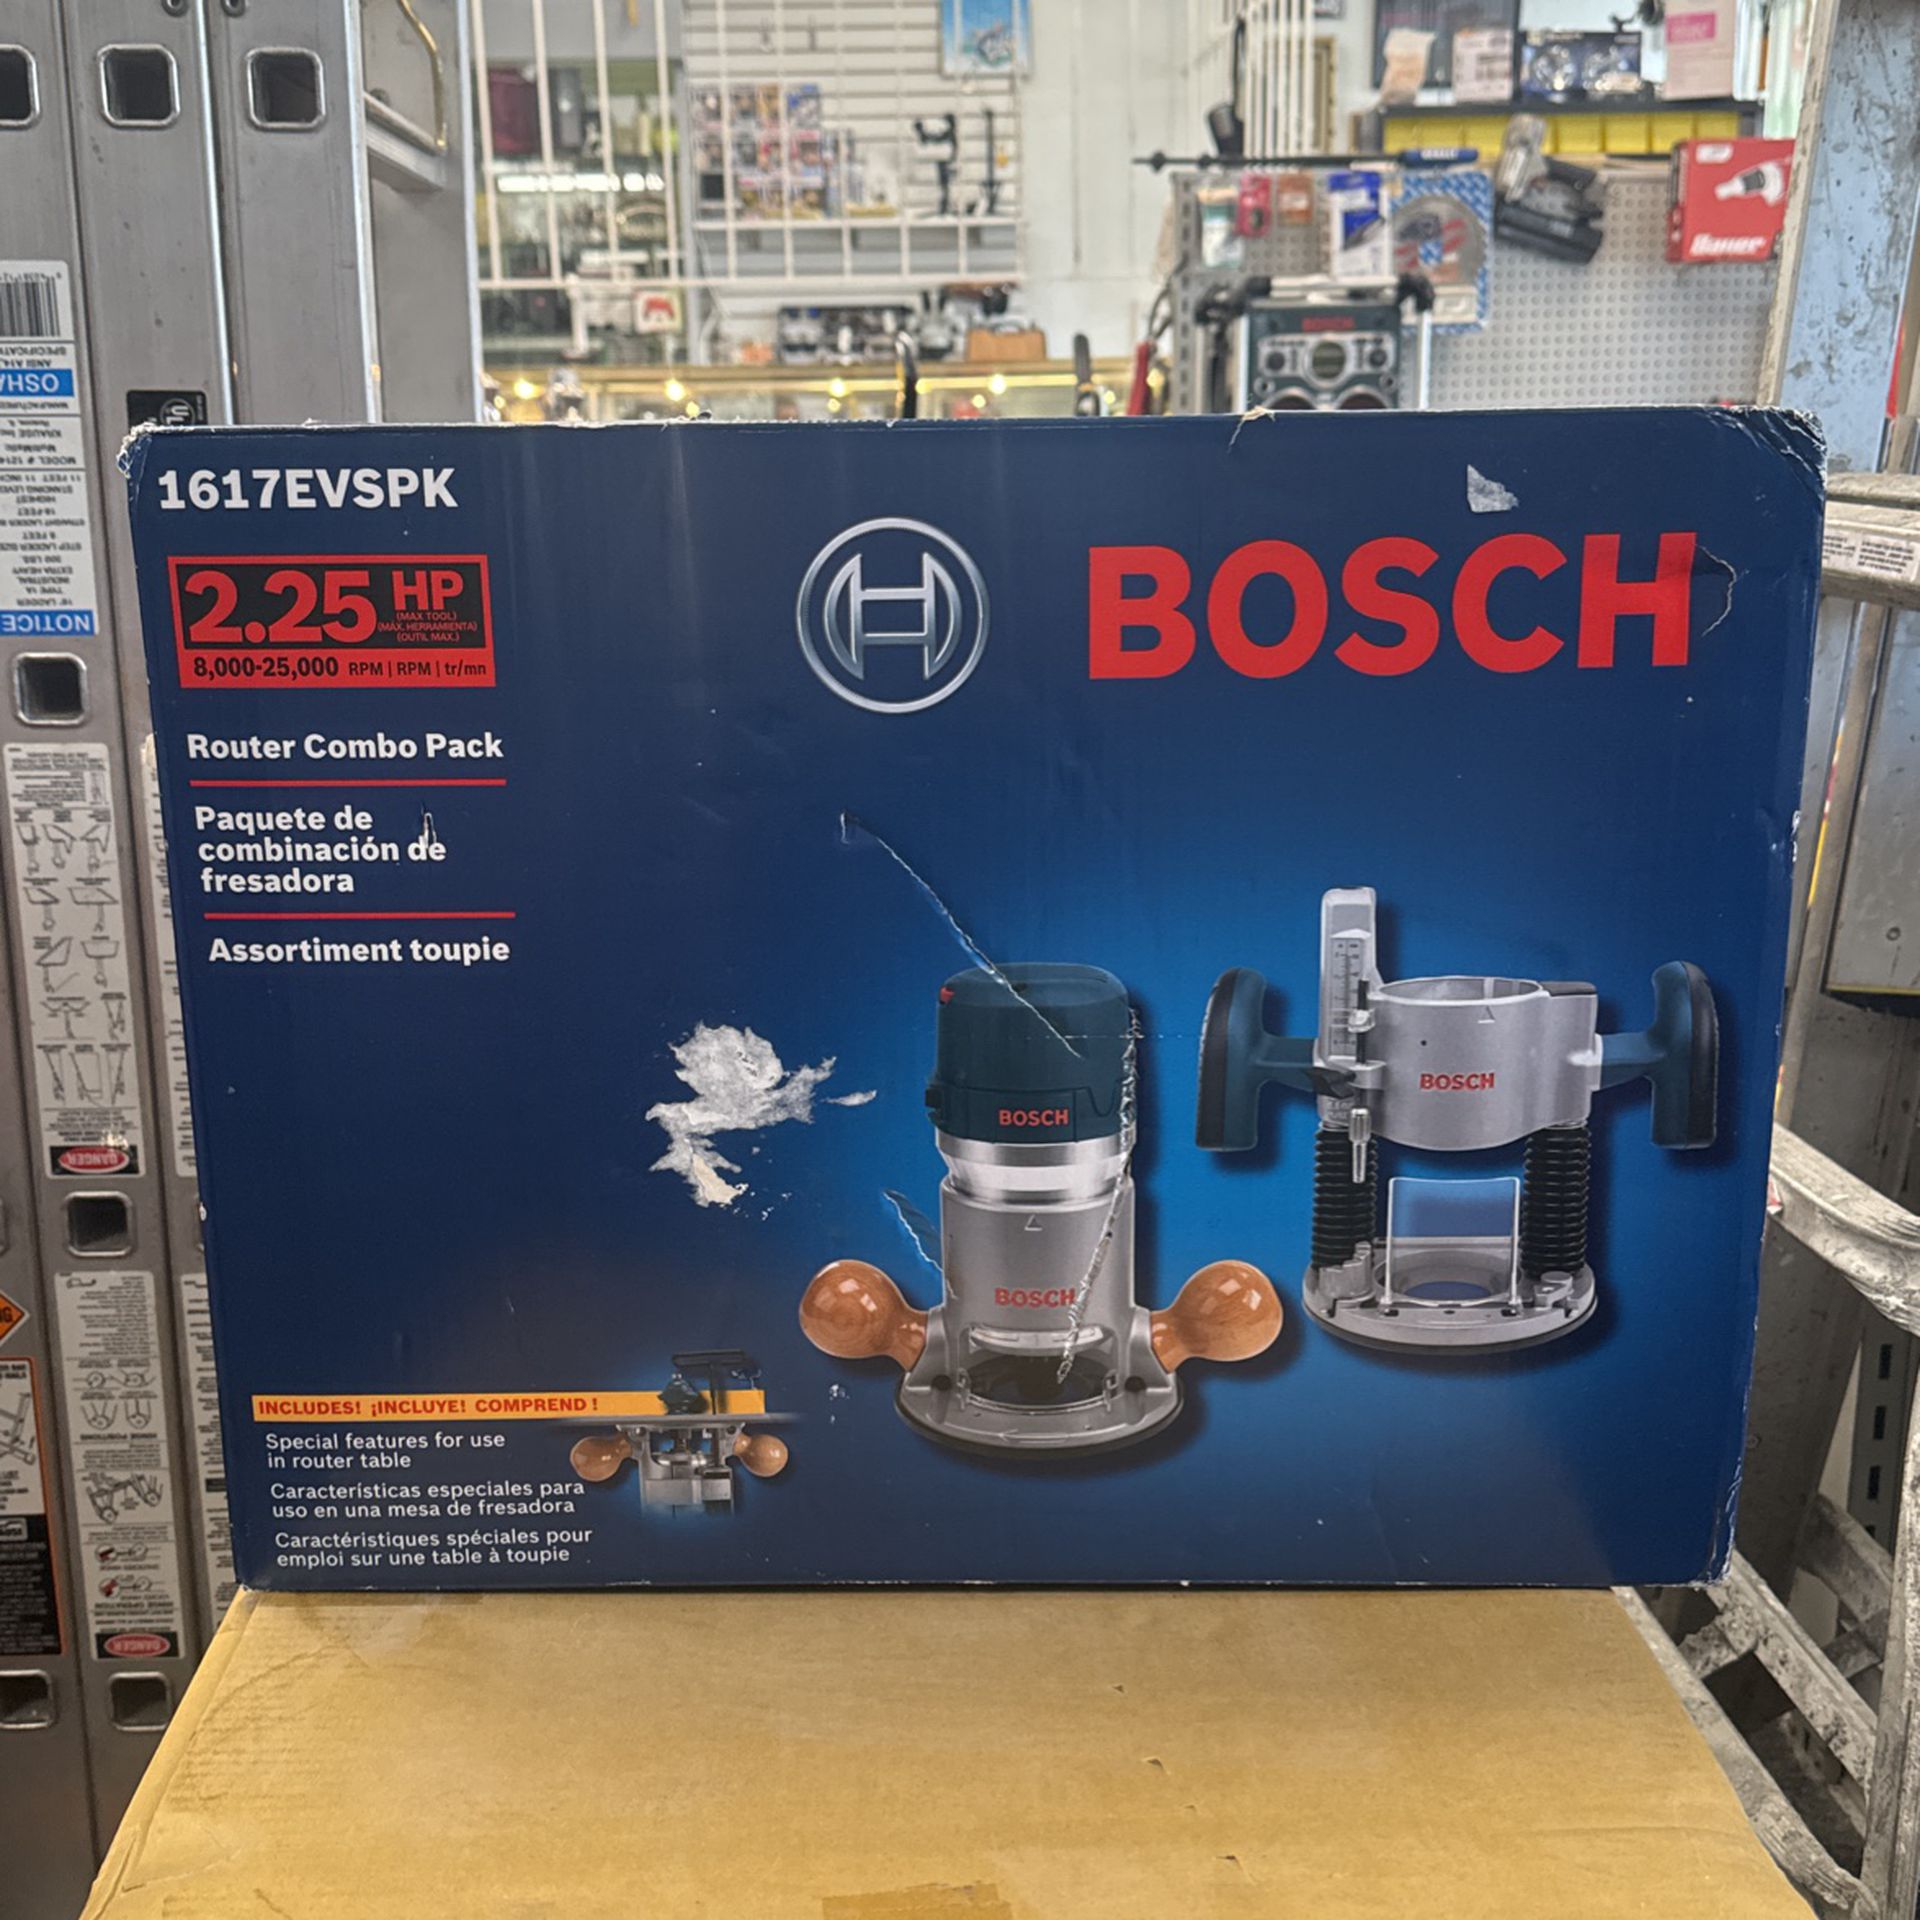 Router Combo Pack BOSCH